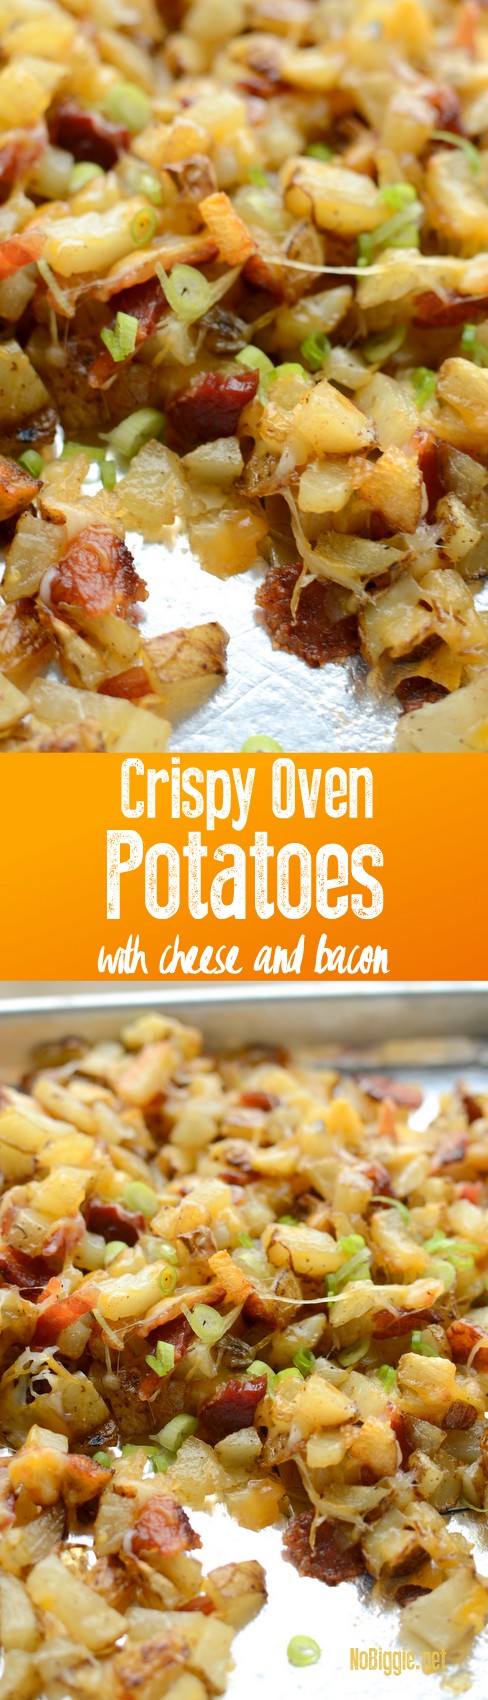 Crispy Oven Potatoes with cheese and bacon | they taste just like Outback Steak House Cheese Fries | NoBiggie.net